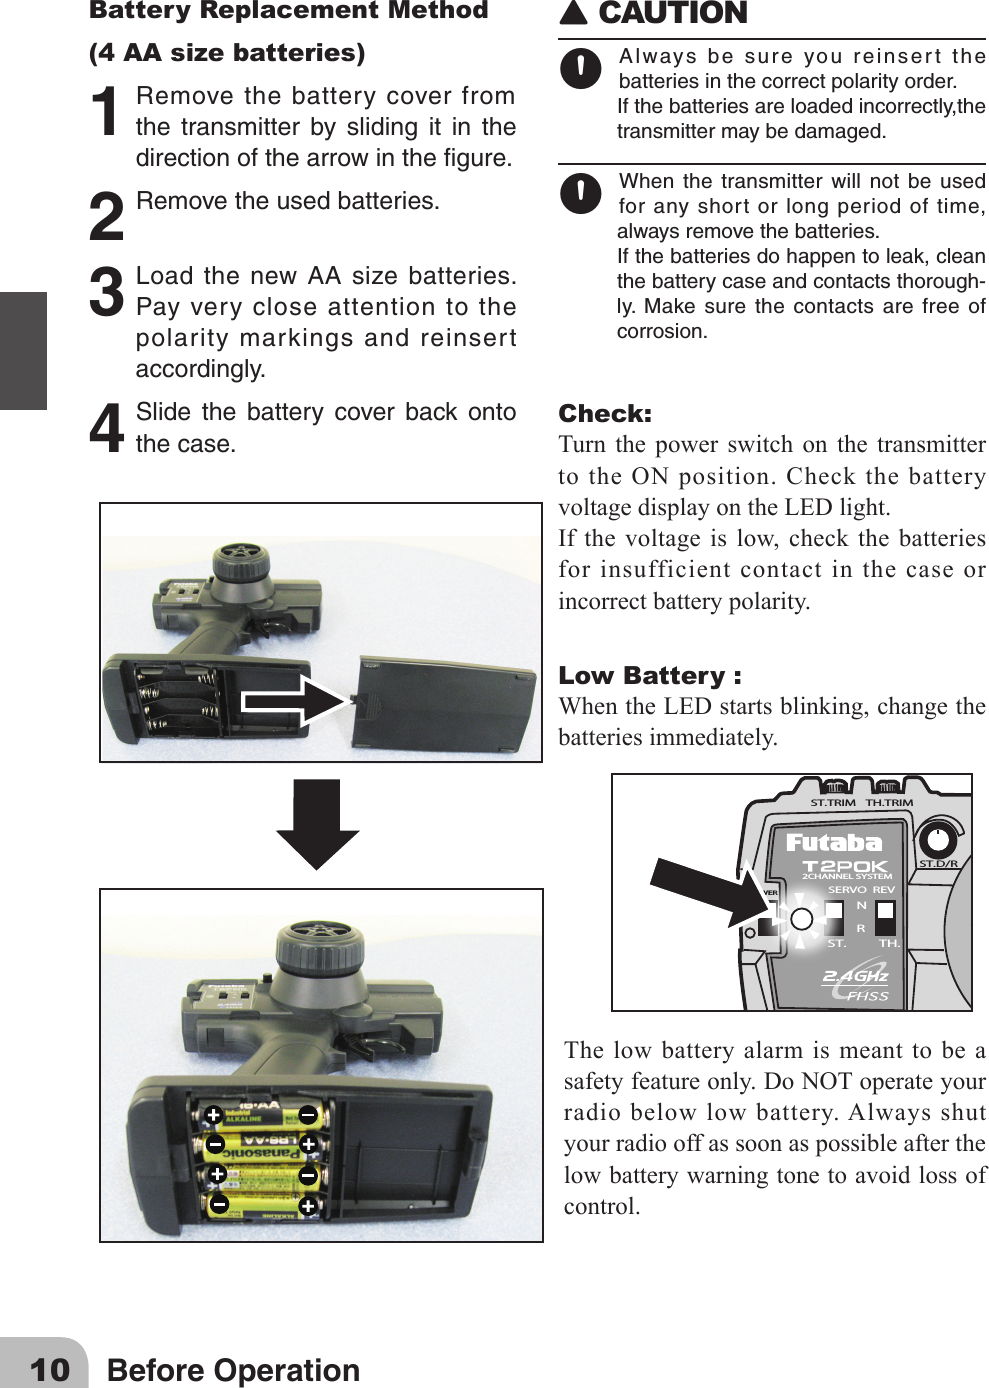 10 Before OperationBattery Replacement Method(4 AA size batteries)1 Removethebatterycoverfromthe transmitter by sliding it in thedirectionofthearrowinthegure.2 Removetheusedbatteries.3 LoadthenewAAsizebatteries.Payverycloseattentiontothepolaritymarkingsandreinsertaccordingly.4 Slide the battery cover back ontothecase.󾙈CAUTION 󾙊Alwaysbesureyoureinsertthebatteriesinthecorrectpolarityorder.Ifthebatteriesareloadedincorrectly,thetransmittermaybedamaged.󾙊When the transmitter will not be usedforanyshortorlongperiodoftime,alwaysremovethebatteries.Ifthebatteriesdohappentoleak,cleanthebatterycaseandcontactsthorough-ly. Make surethecontactsarefreeofcorrosion.Check:Turn the power switch on the transmitter to the ON position. Check the battery voltagedisplayontheLEDlight.Ifthe voltageislow,check thebatteriesfor insufficient contact in the case or incorrect battery polarity. Low Battery :WhentheLEDstartsblinking,changethebatteries immediately.2CHANNEL SYSTEMSERVO  REVST.D/RNRST. TH.POWERST.TRIM TH.TRIMThe low battery alarm is meant to be a safetyfeatureonly.DoNOToperateyourradio below low battery. Always shut your radio off as soon as possible after the low battery warning tone to avoid loss of control.